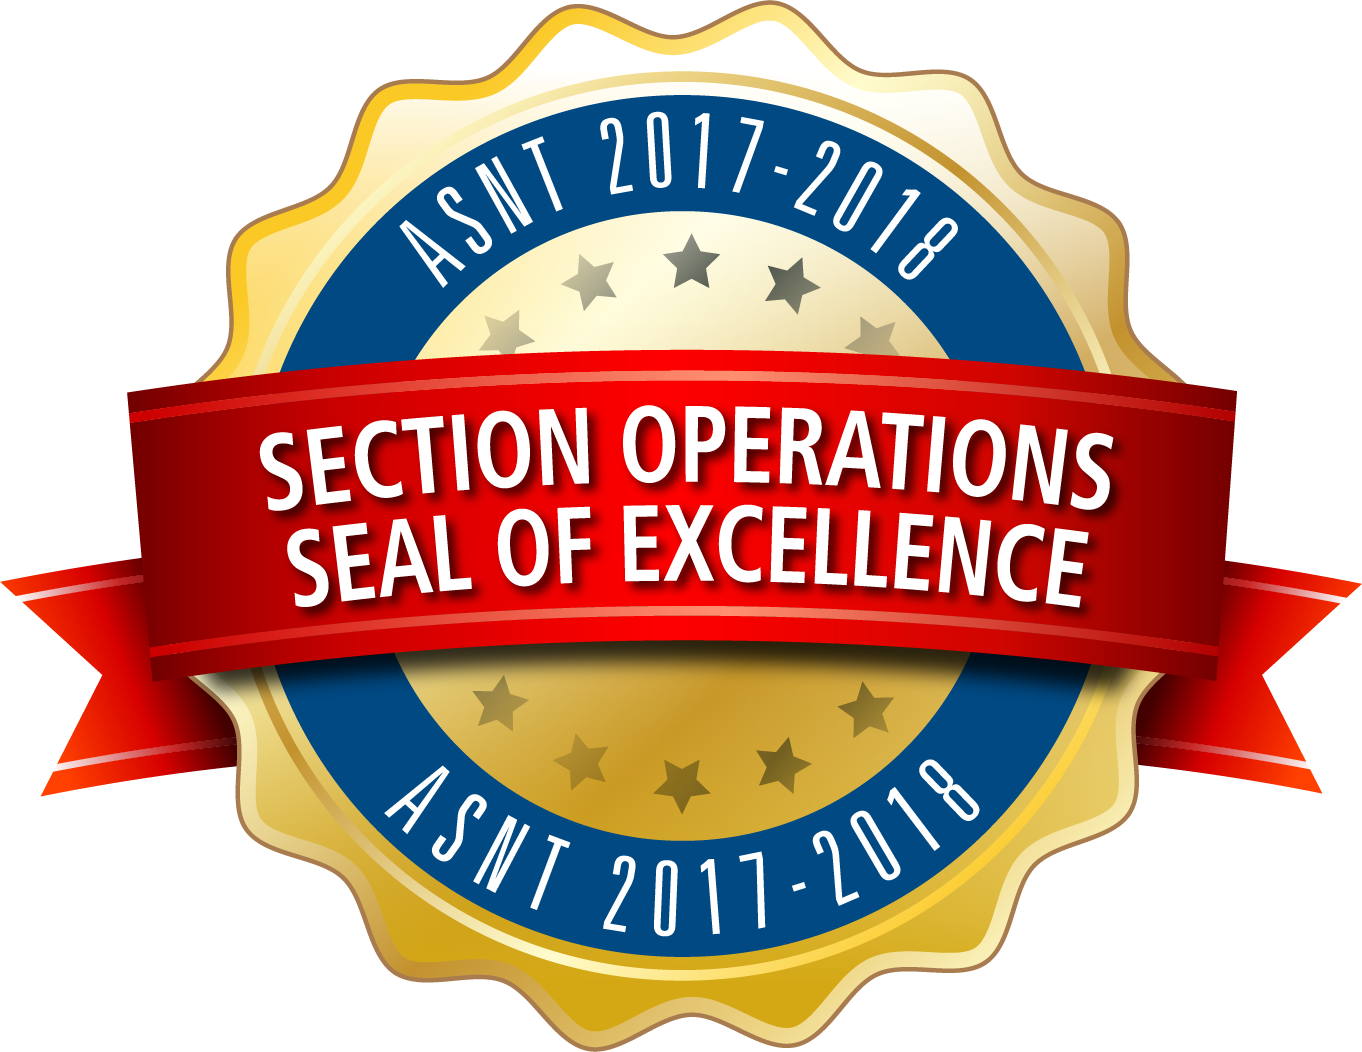 Seal of Excellance